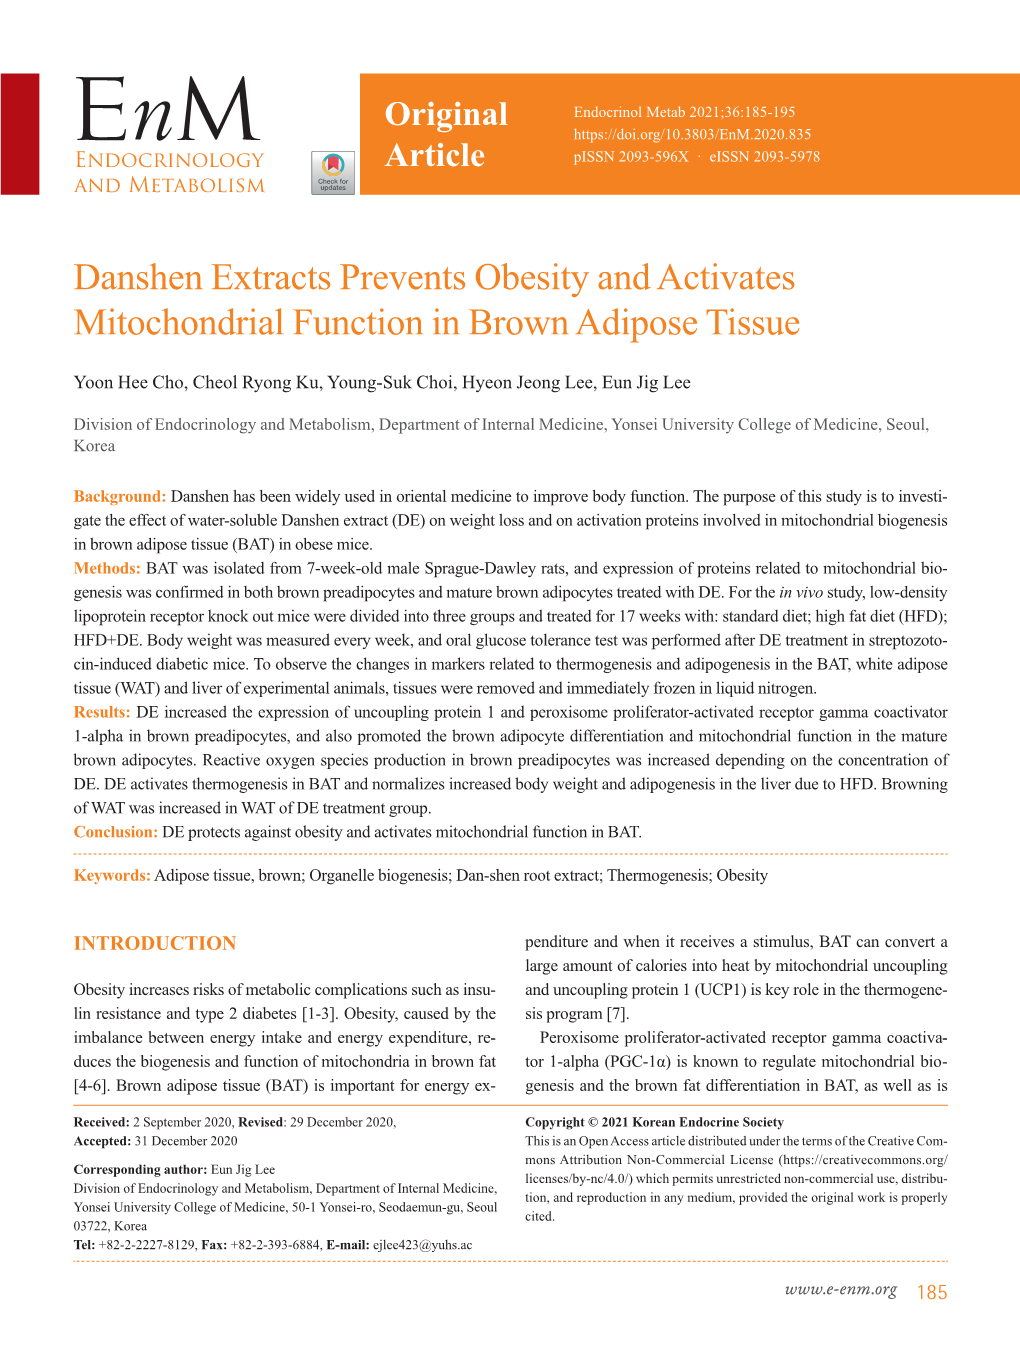 Danshen Extracts Prevents Obesity and Activates Mitochondrial Function in Brown Adipose Tissue